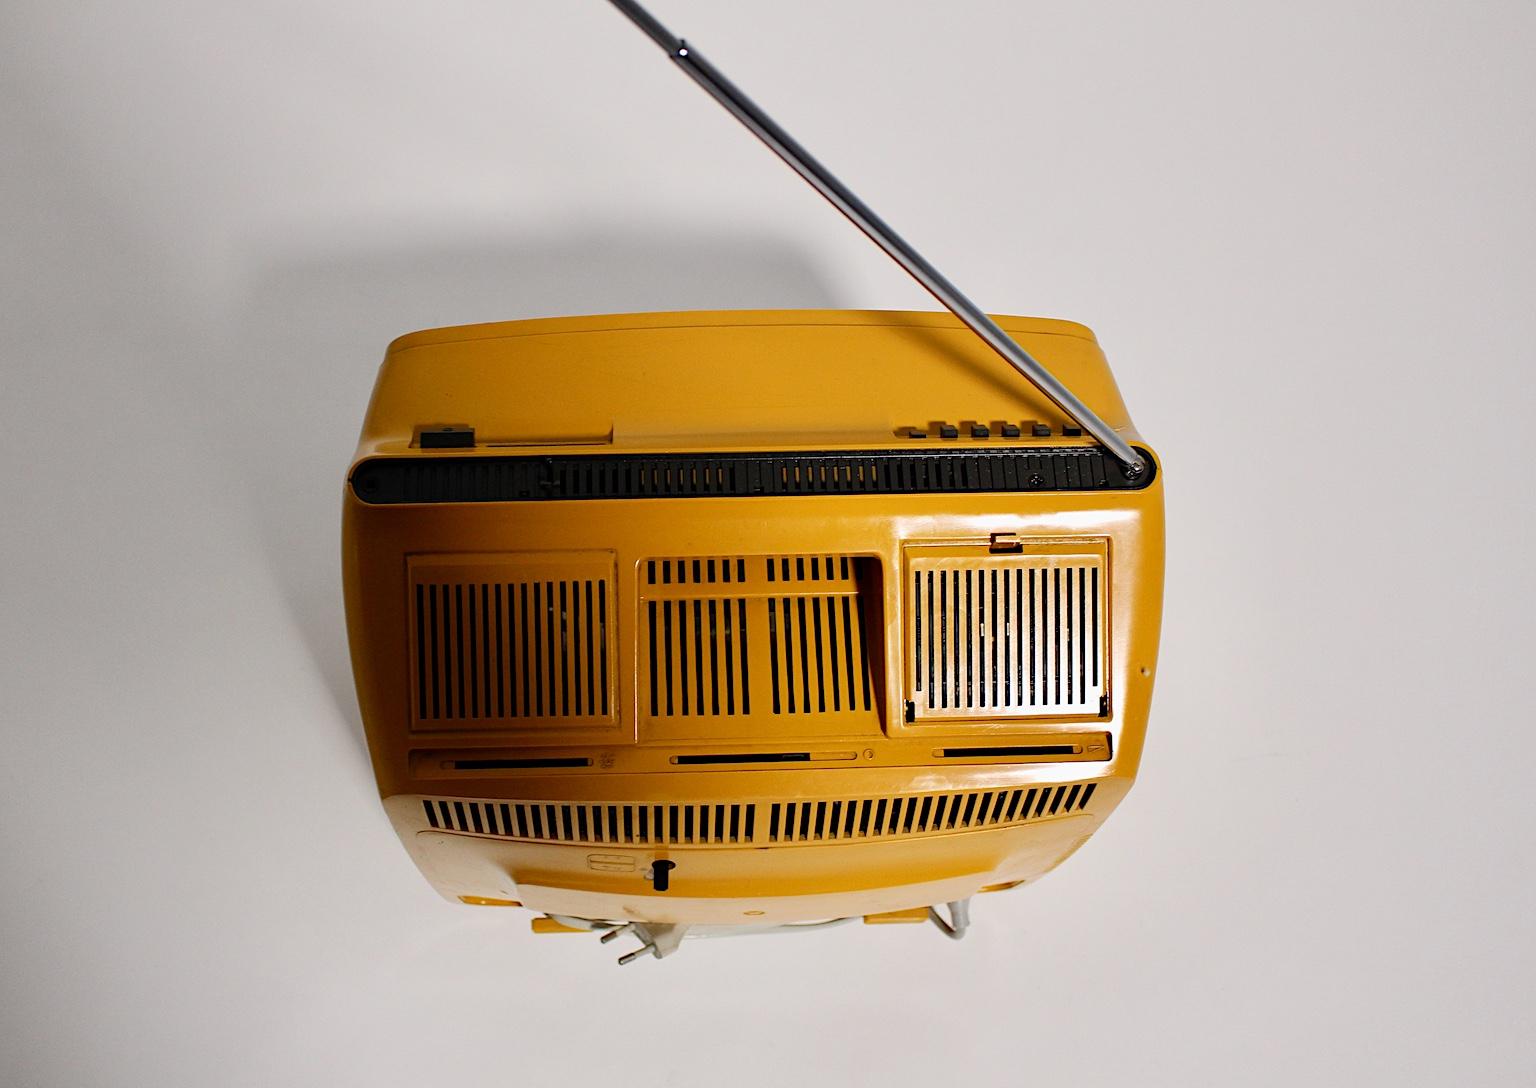 Space Age Yellow Vintage Plastic Television Hornyphon, 1970s, Austria For Sale 2